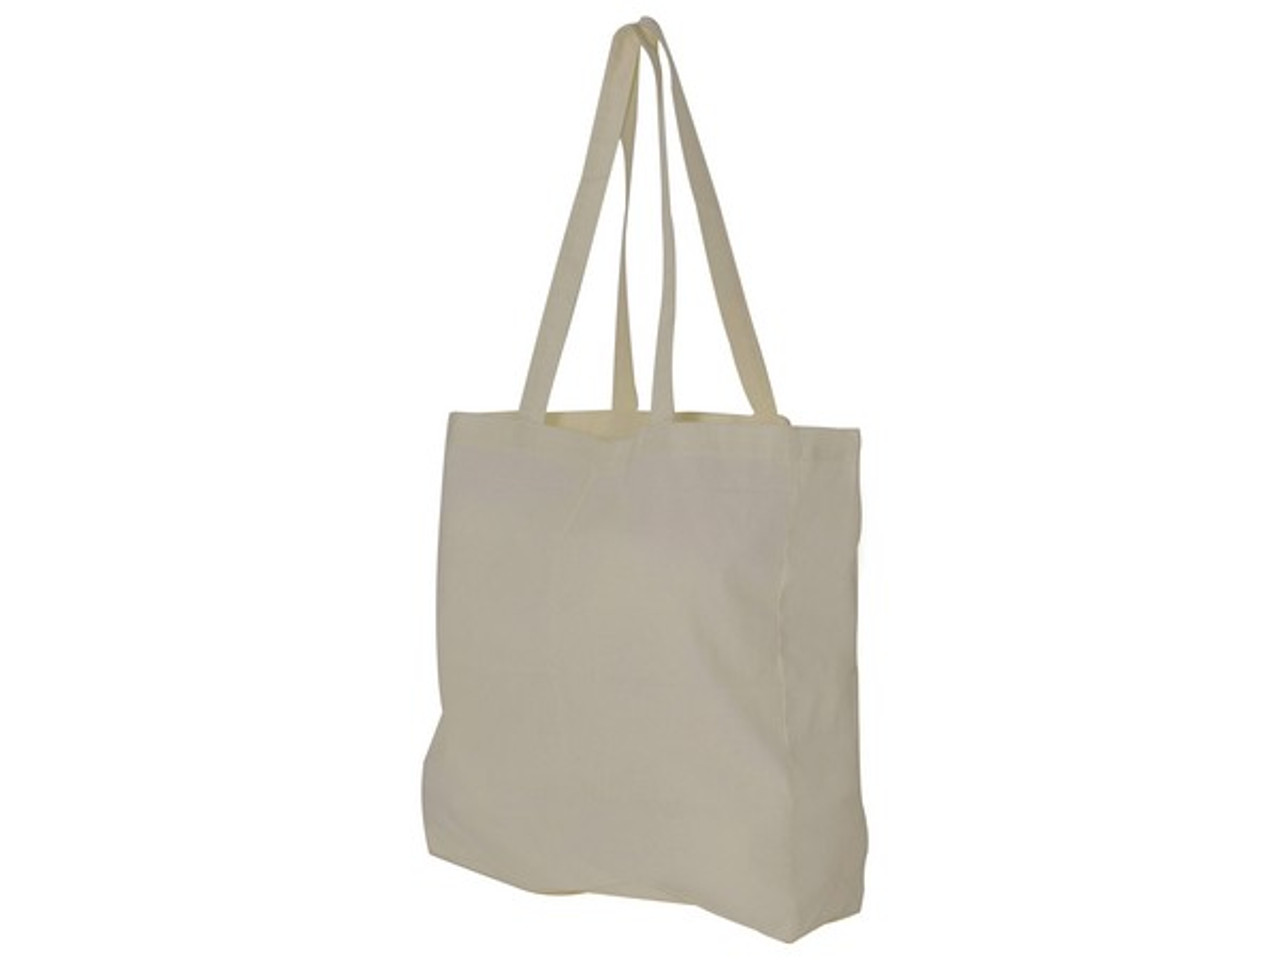 Cotton Shopper Tote Bag with thick side gussets